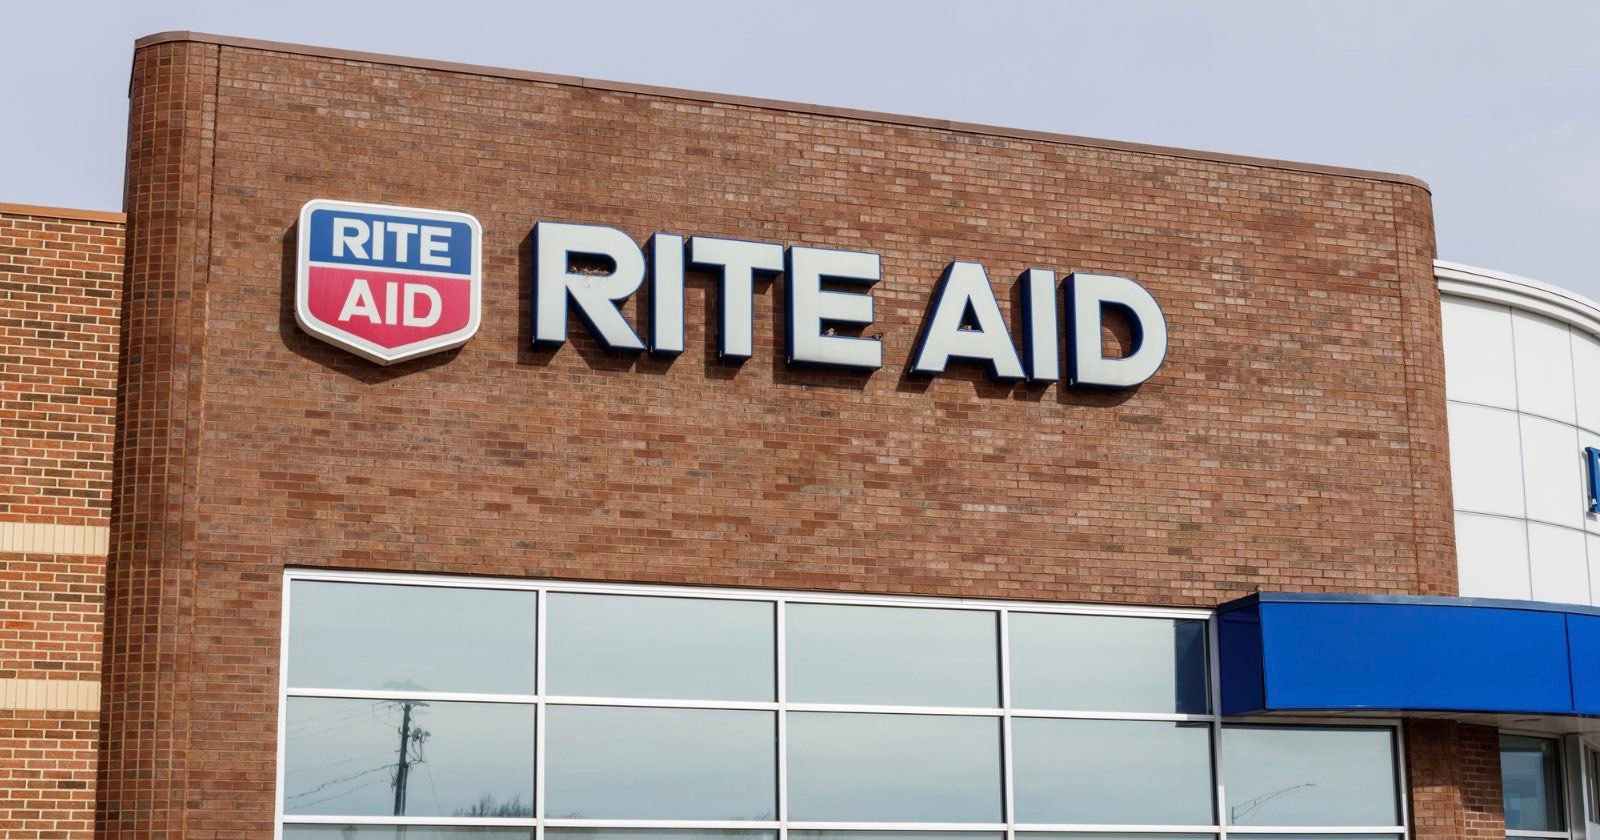  rite aid banned from facial recognition tech after 